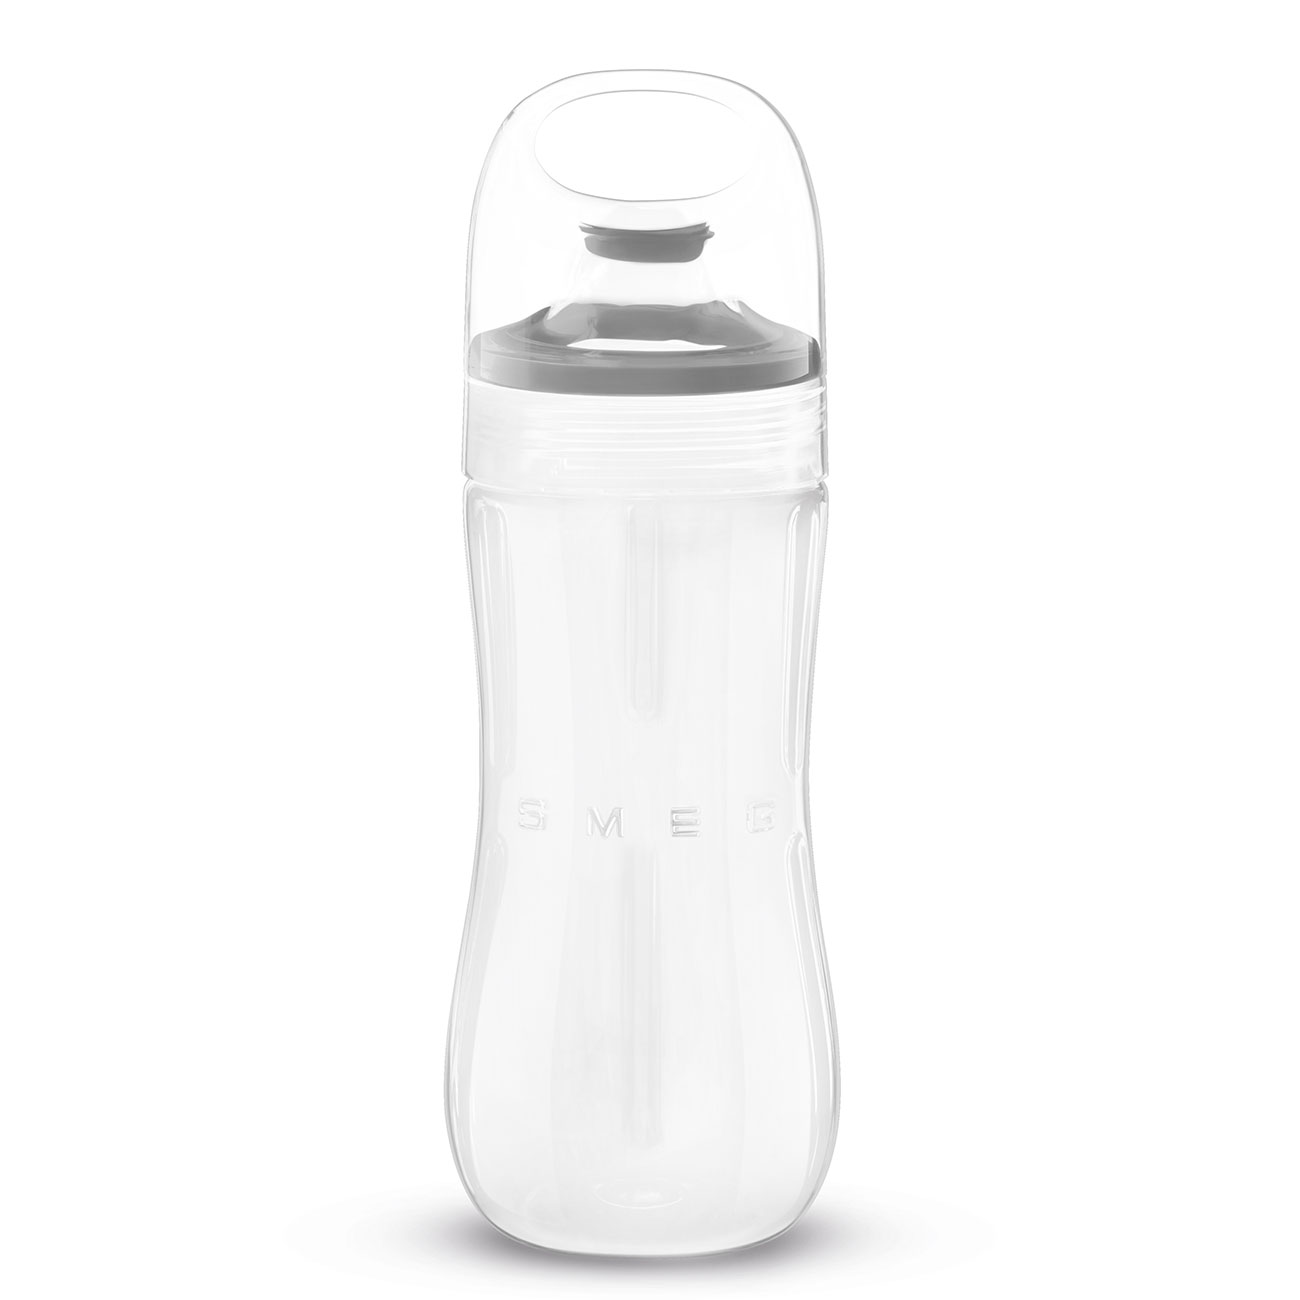 Bottle To Go with blades accessory for Smeg Blender - BGF03_1